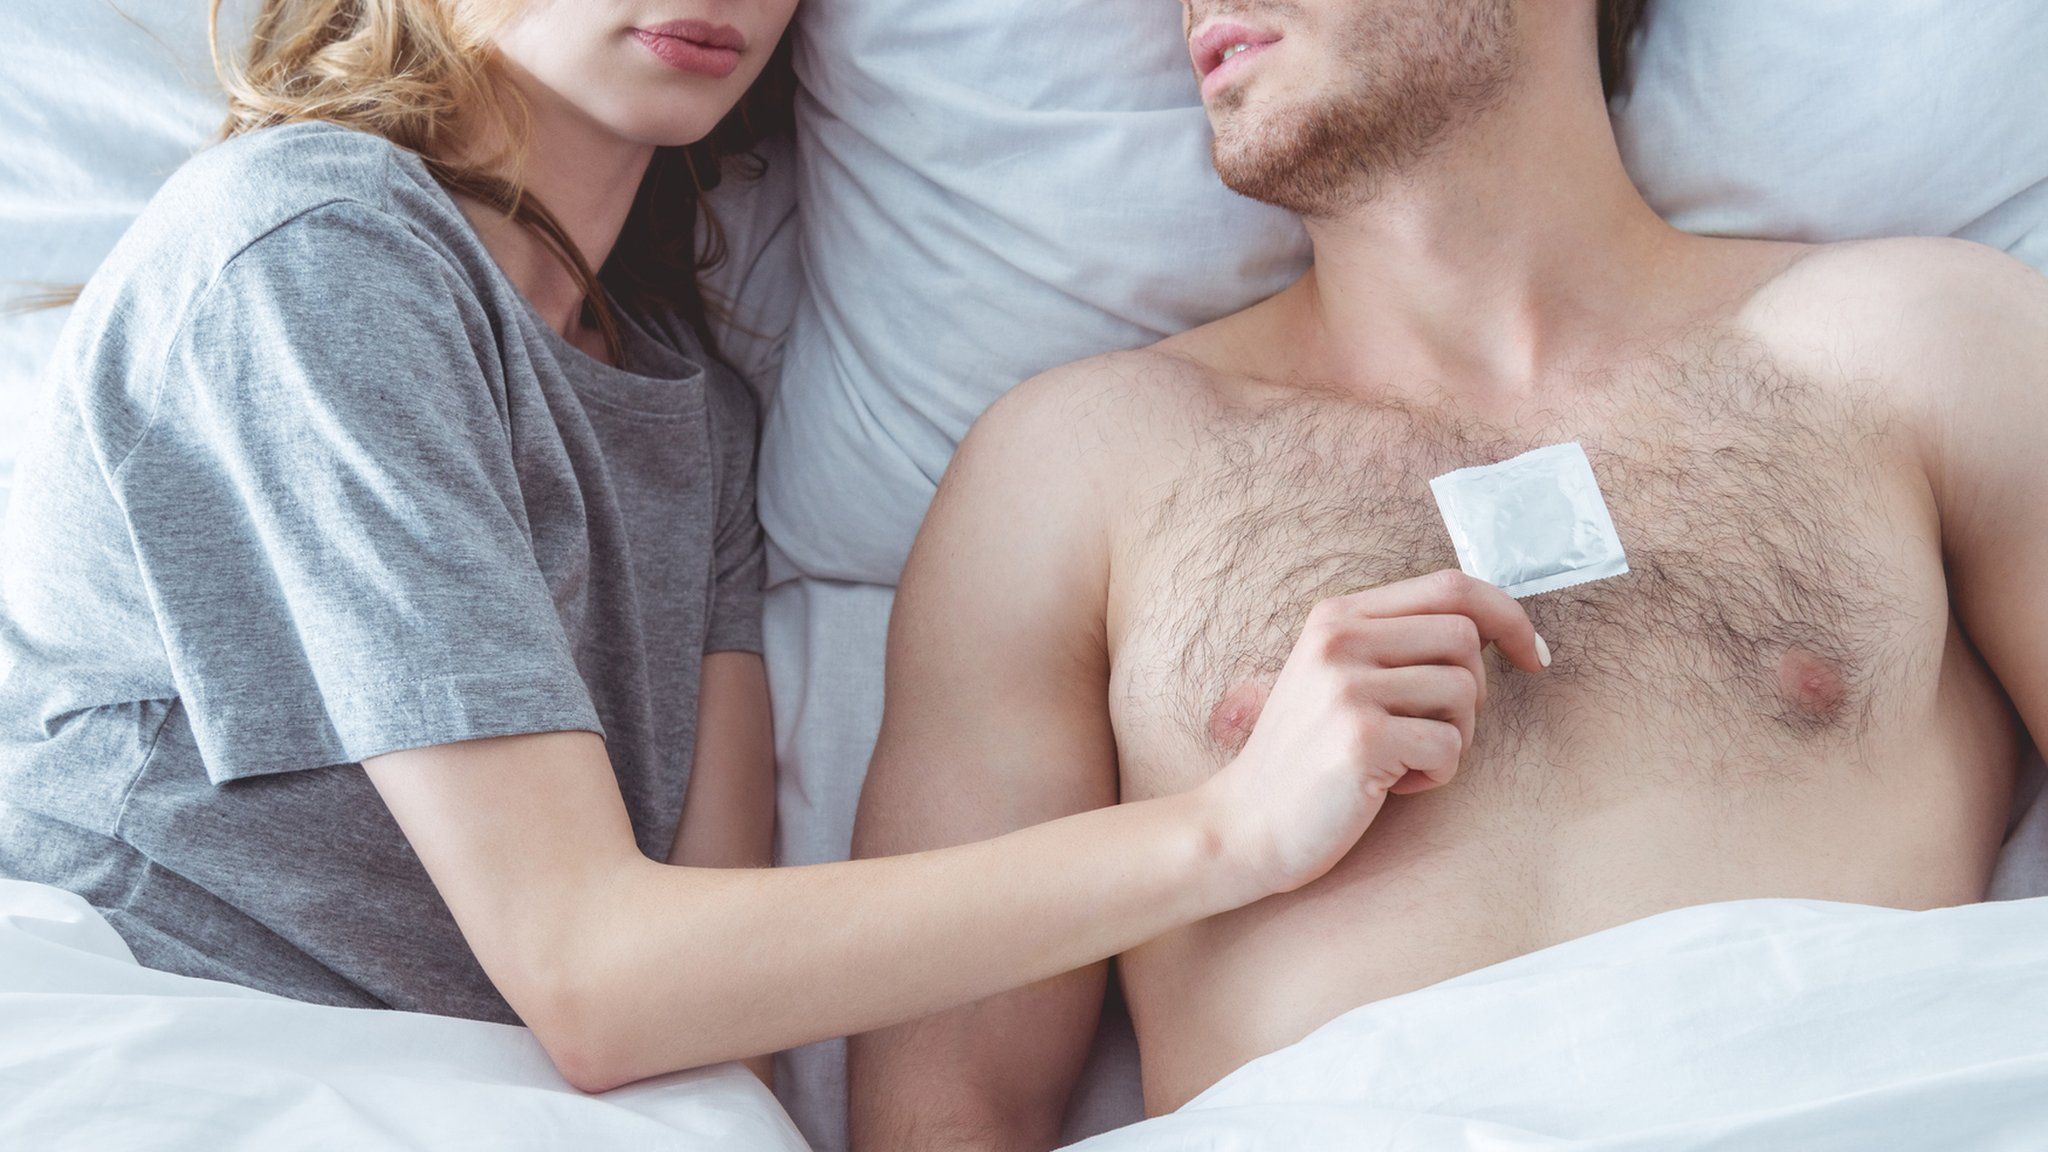 Man and woman in bed, woman holding condom